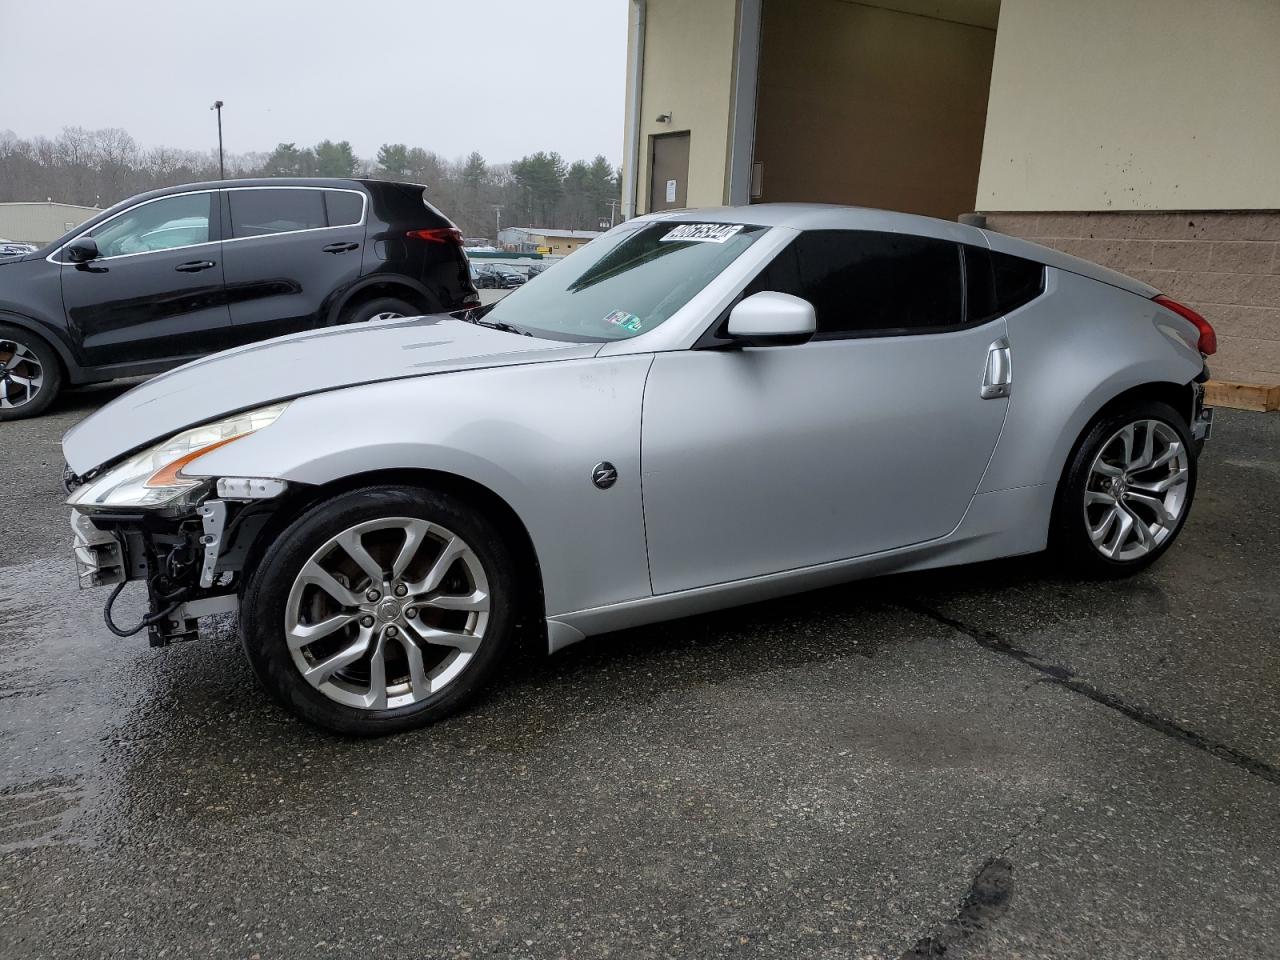 2014 Nissan Z at RI - Exeter, Copart lot 48675344 | CarsFromWest